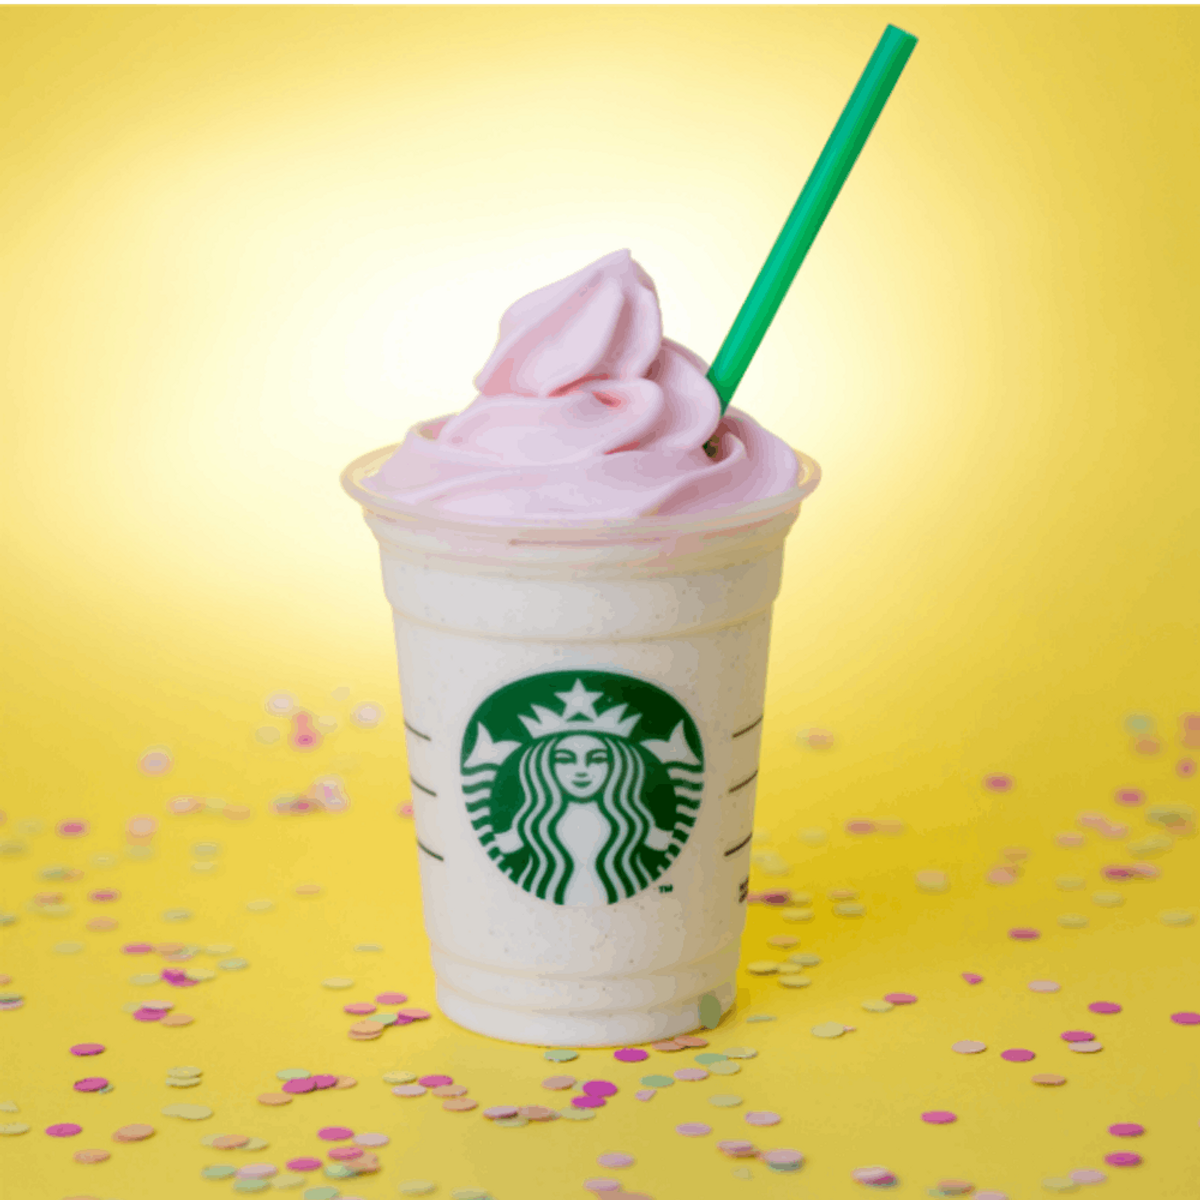 Starbucks Birthday Cake Frappuccino Is Back for a VERY Limited Time